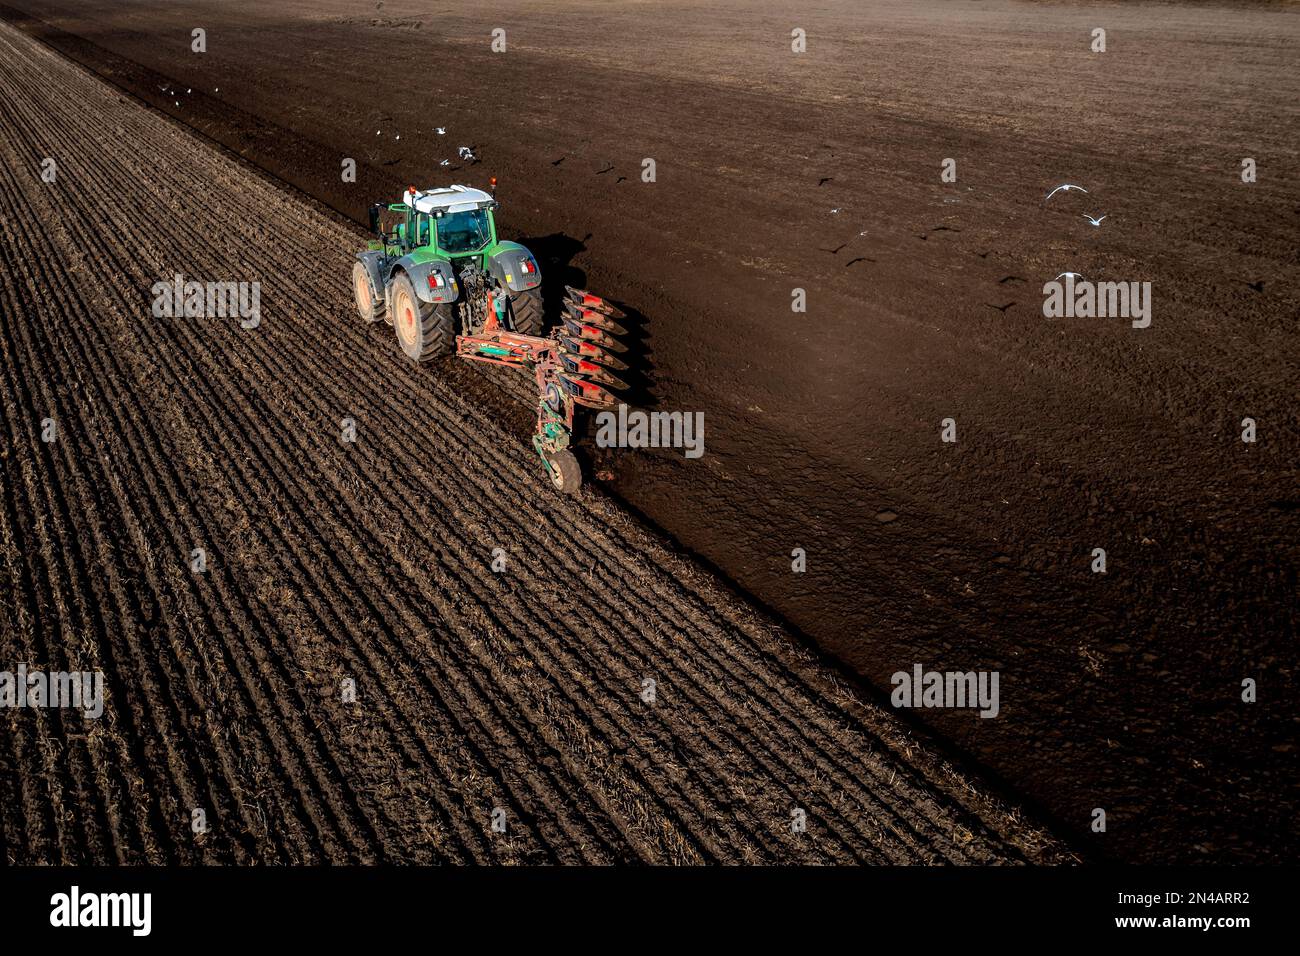 An aerial view of a tractor ploughing a fertile agricultural field with a flock of seagulls and birds scavenging for food in the soil Stock Photo